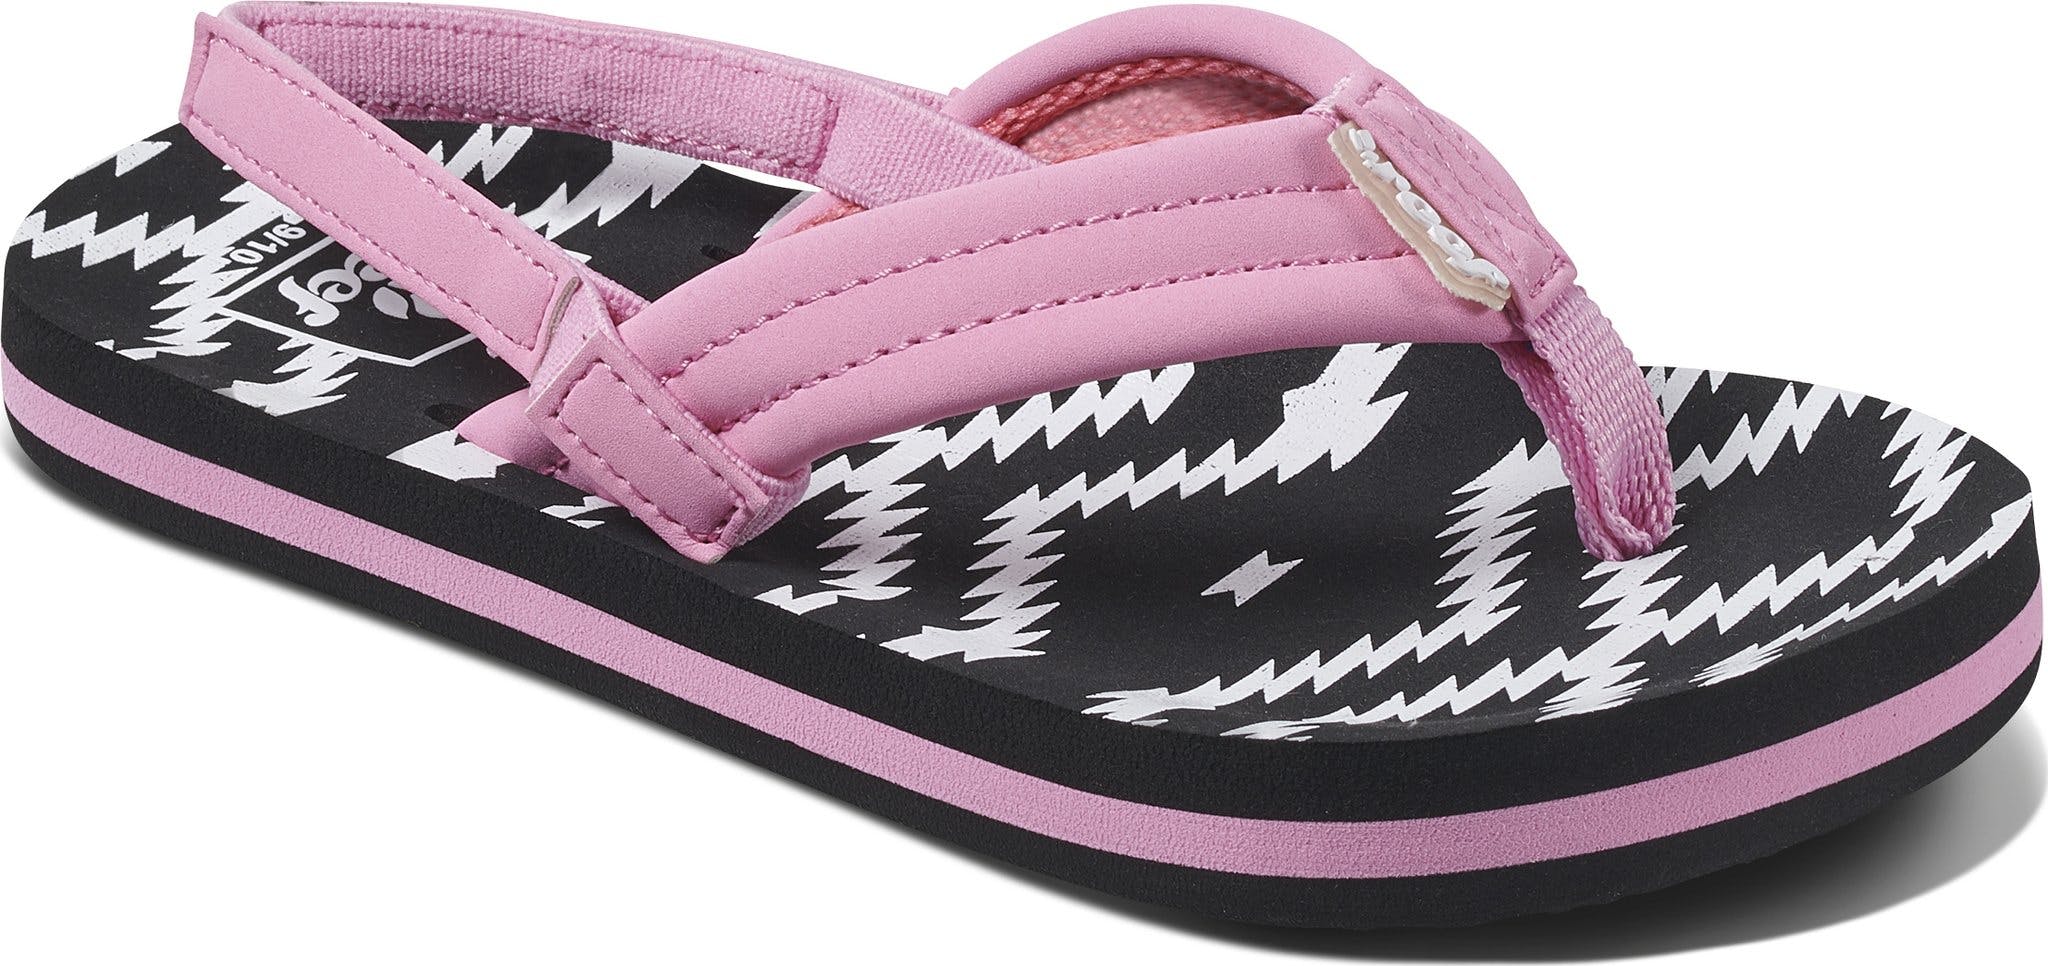 Product image for Little Ahi Sandals - Girls